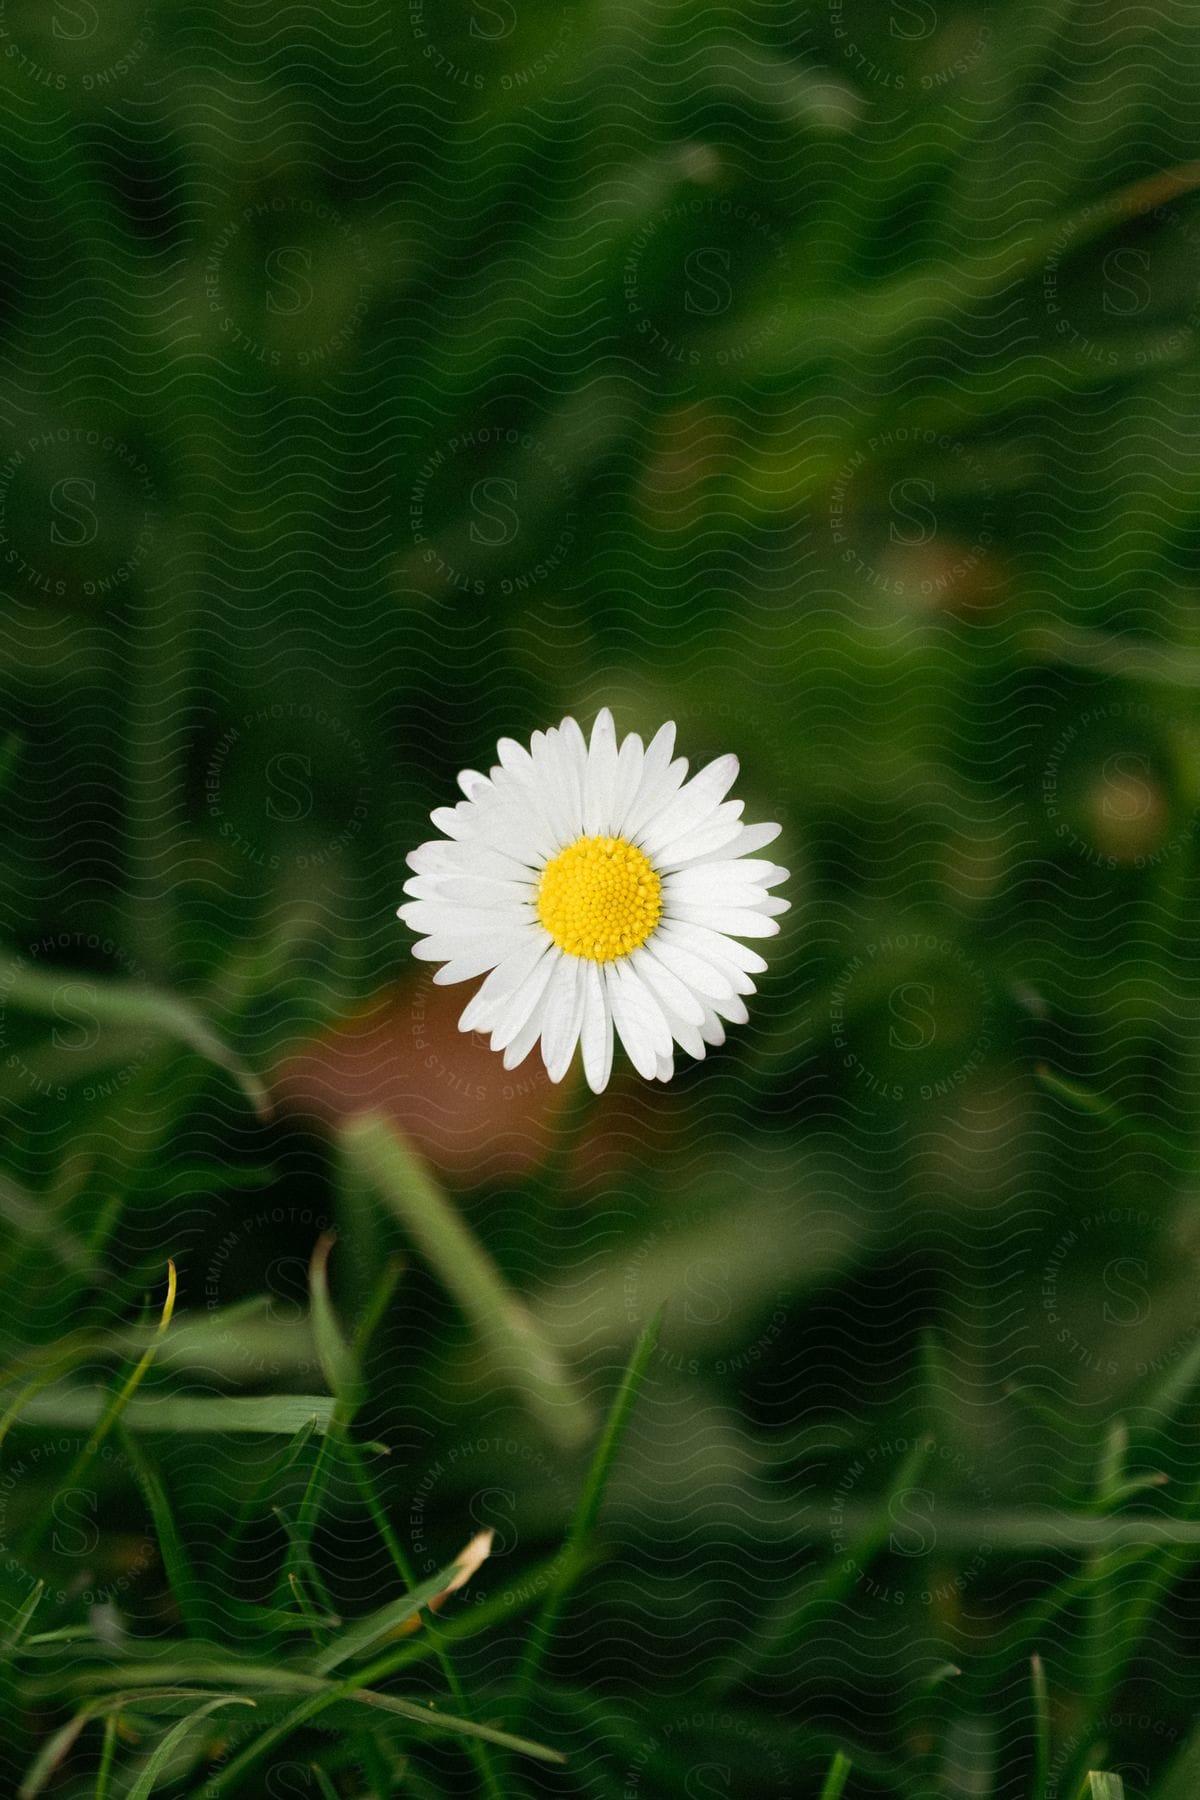 A view of a yellow and white flower in a grassy field.